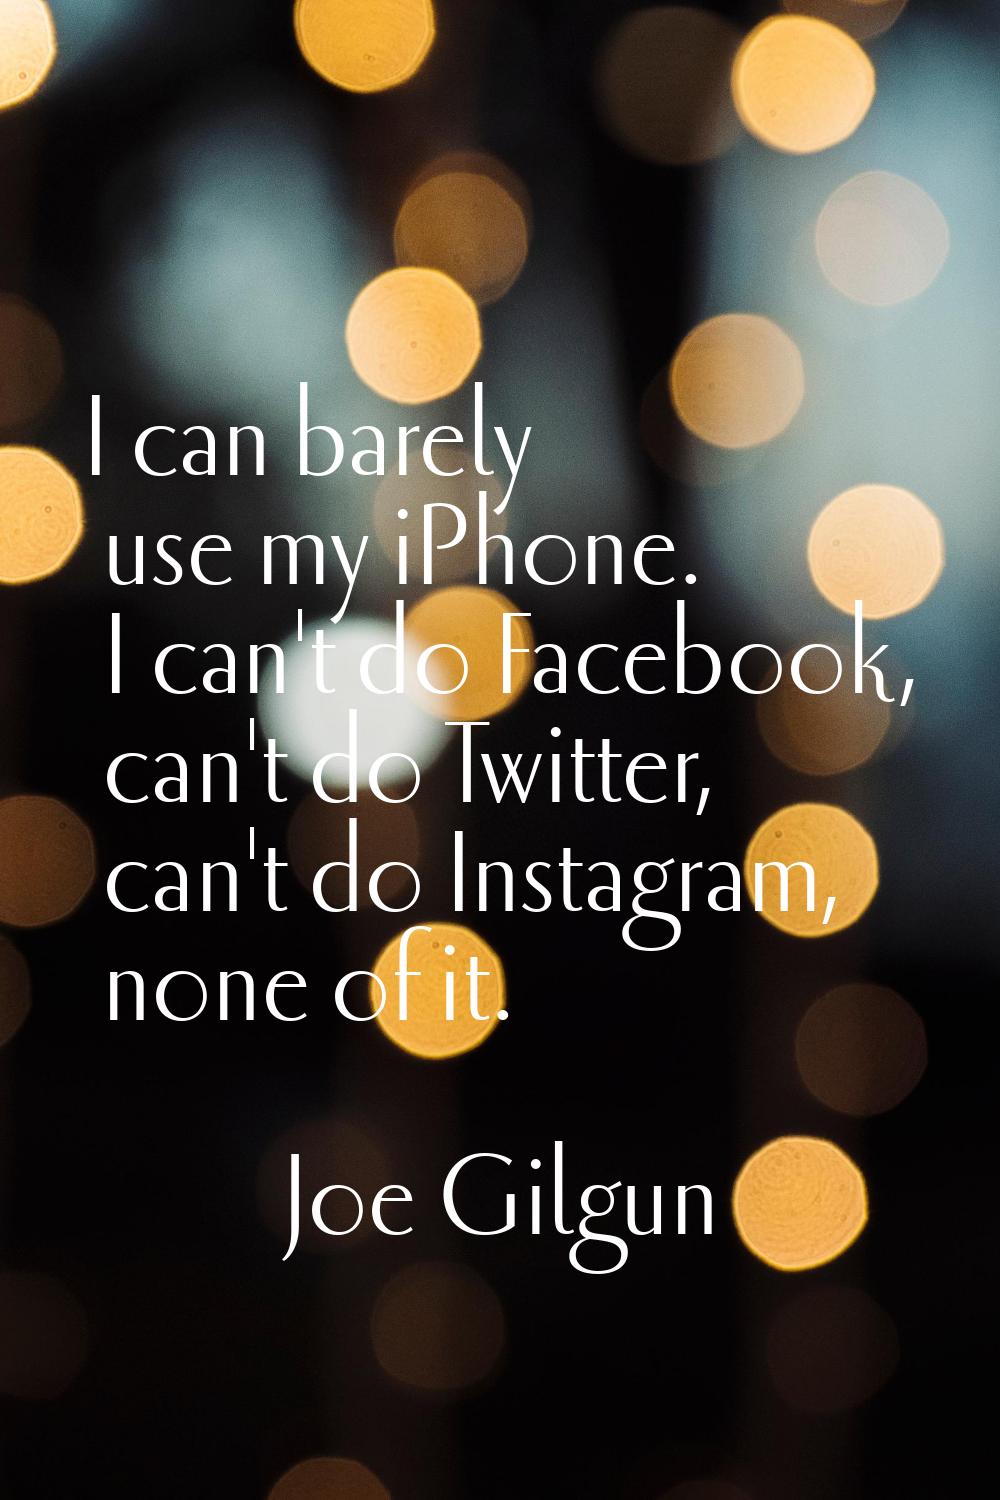 I can barely use my iPhone. I can't do Facebook, can't do Twitter, can't do Instagram, none of it.